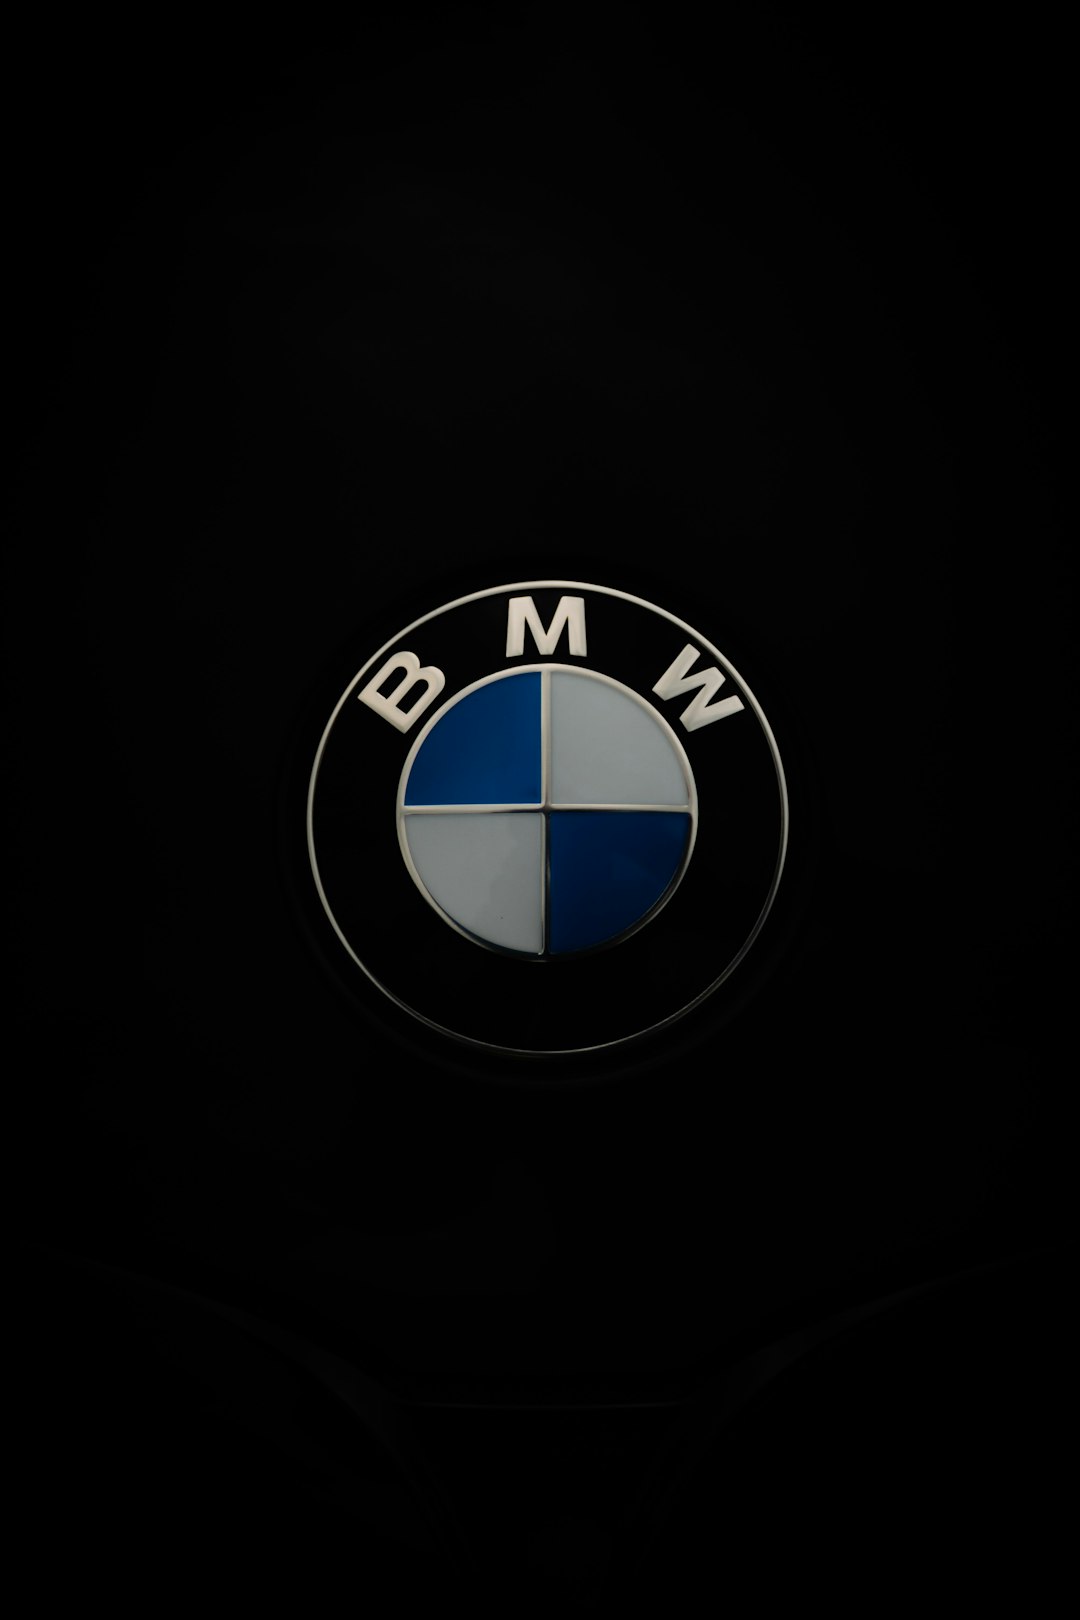 The BMW X6 is a stylish and powerful luxury SUV that combines sporty performance with elegant design.